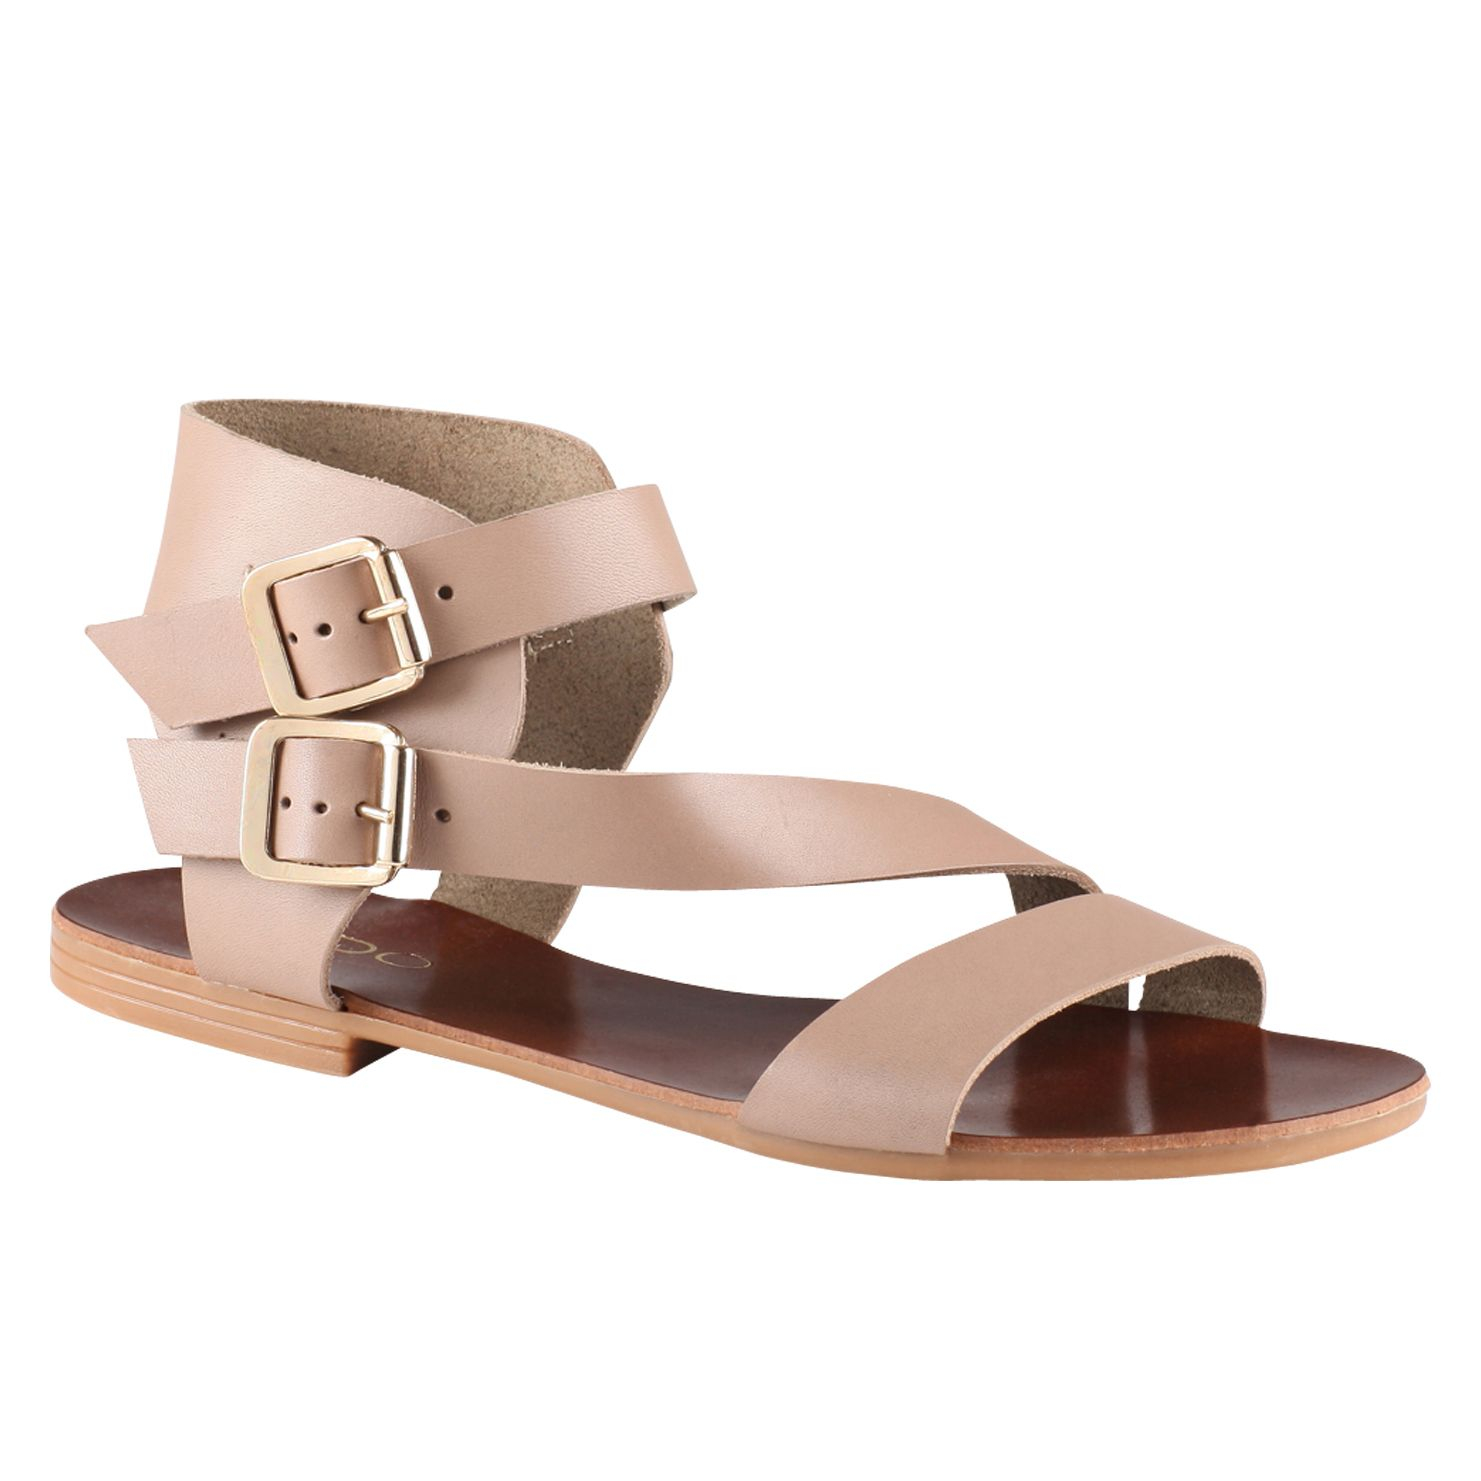 Aldo rensa flat strap sandals. Carry your summer look from day to ...